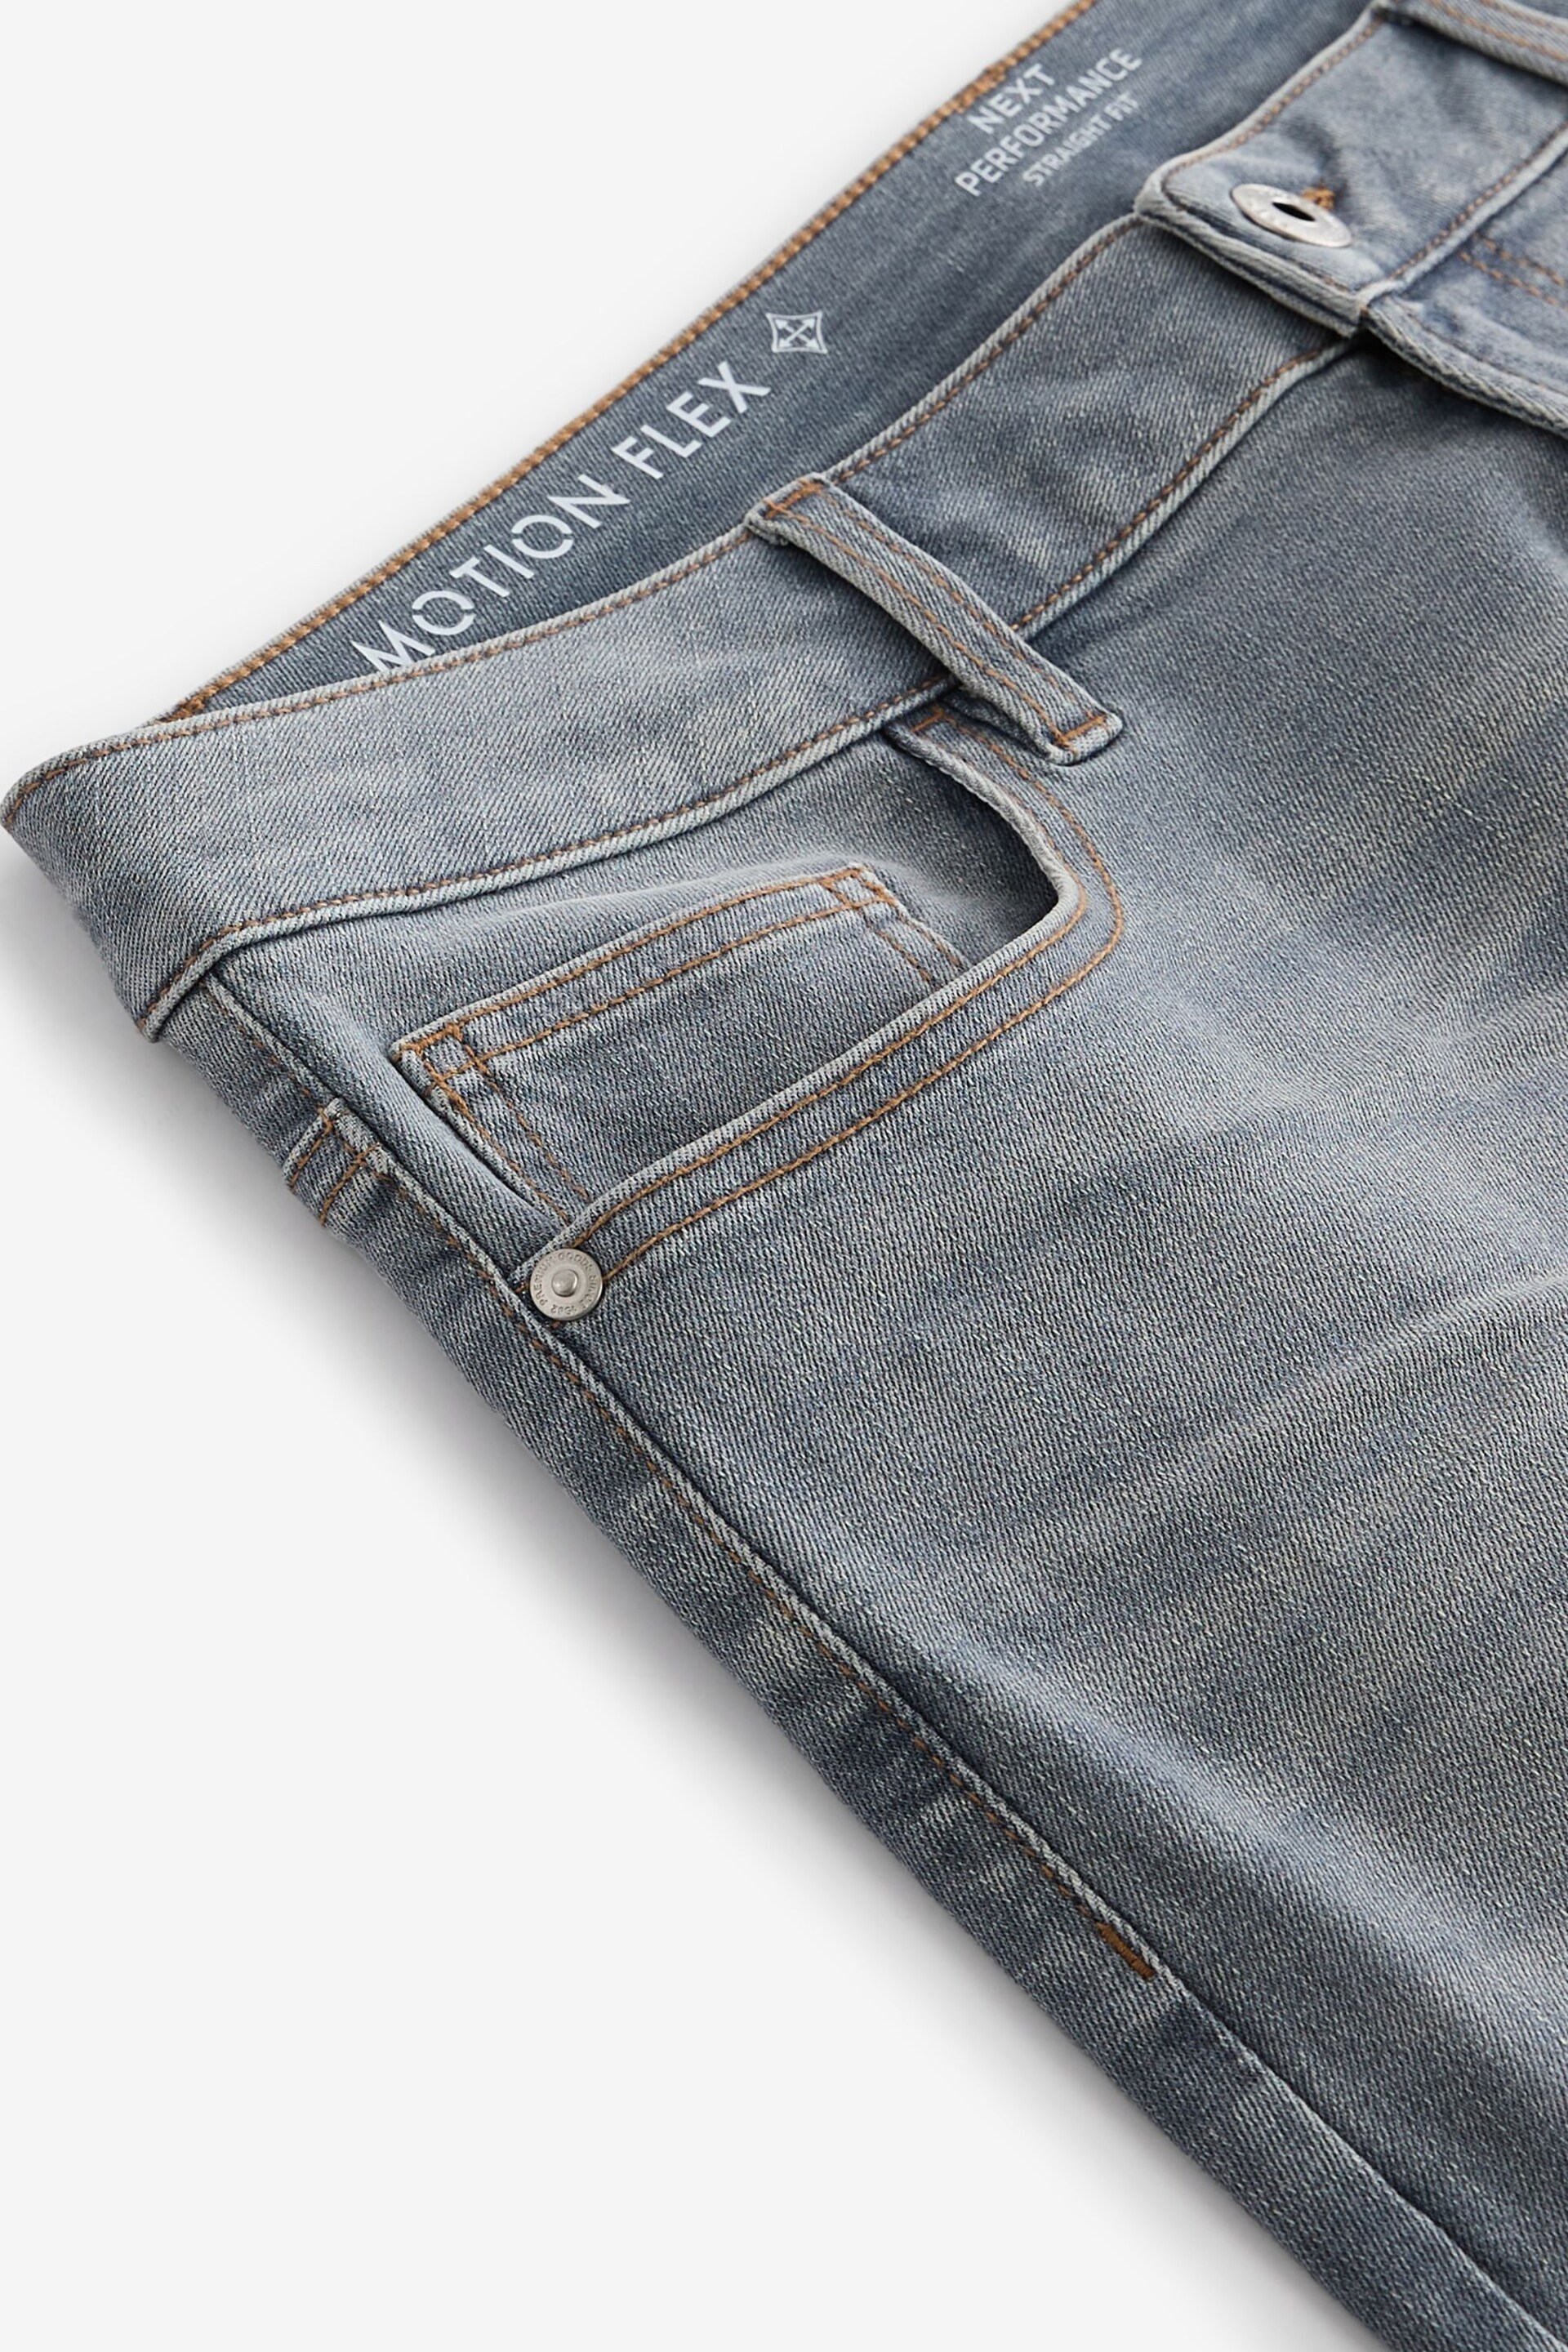 Light Grey Straight Fit Motion Flex Jeans - Image 9 of 12